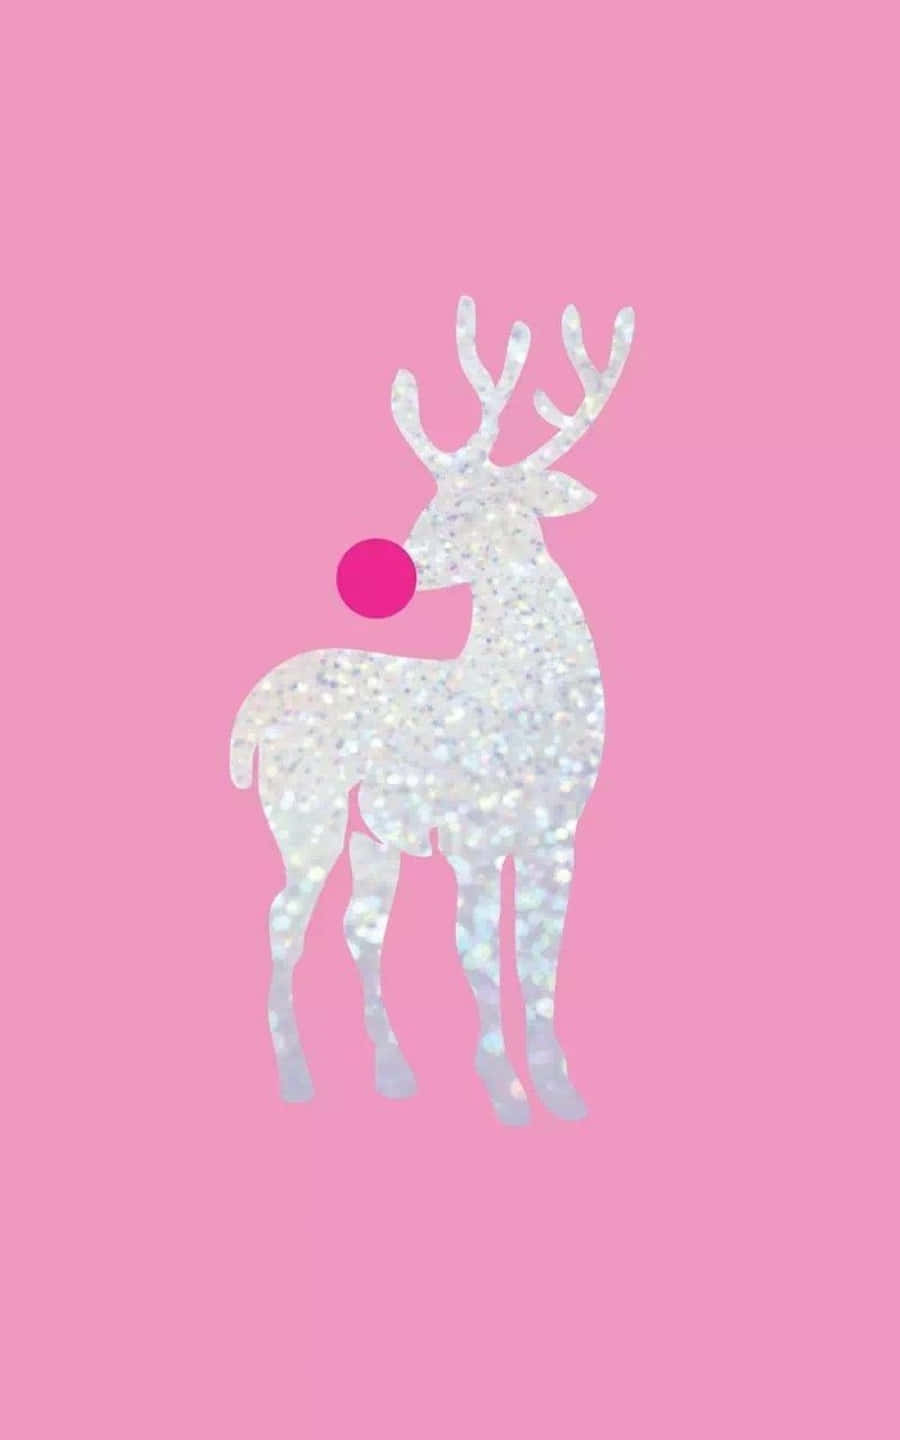 A Reindeer With A Pink Background Wallpaper